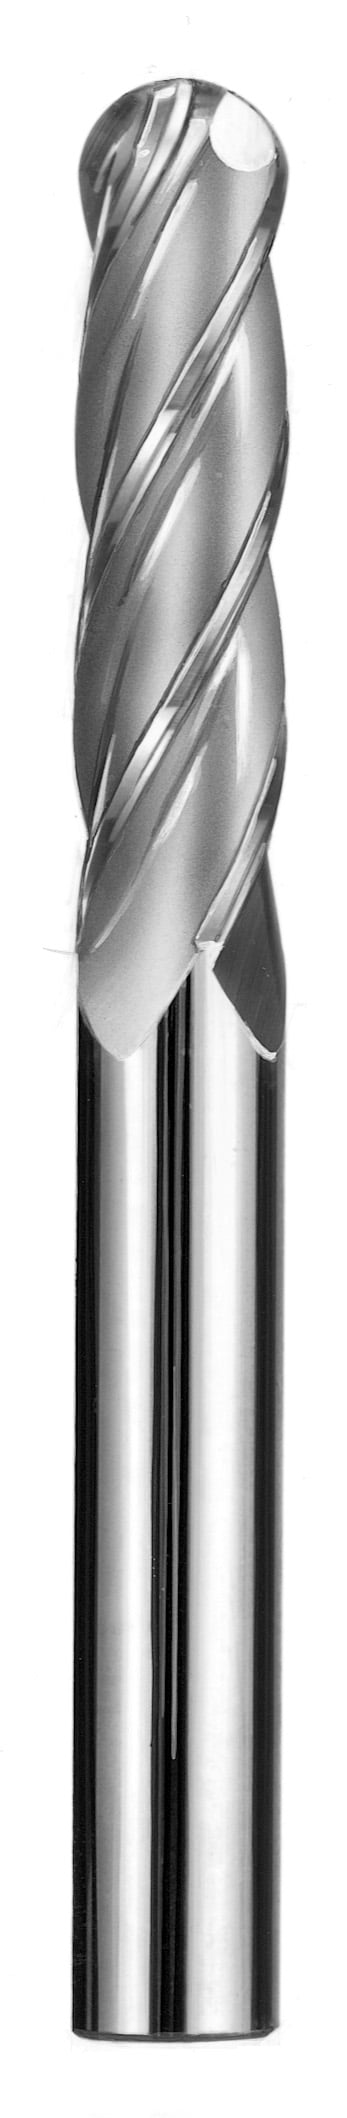 1/8" Dia, 4 Flute, Ball Nose End Mill - 93329